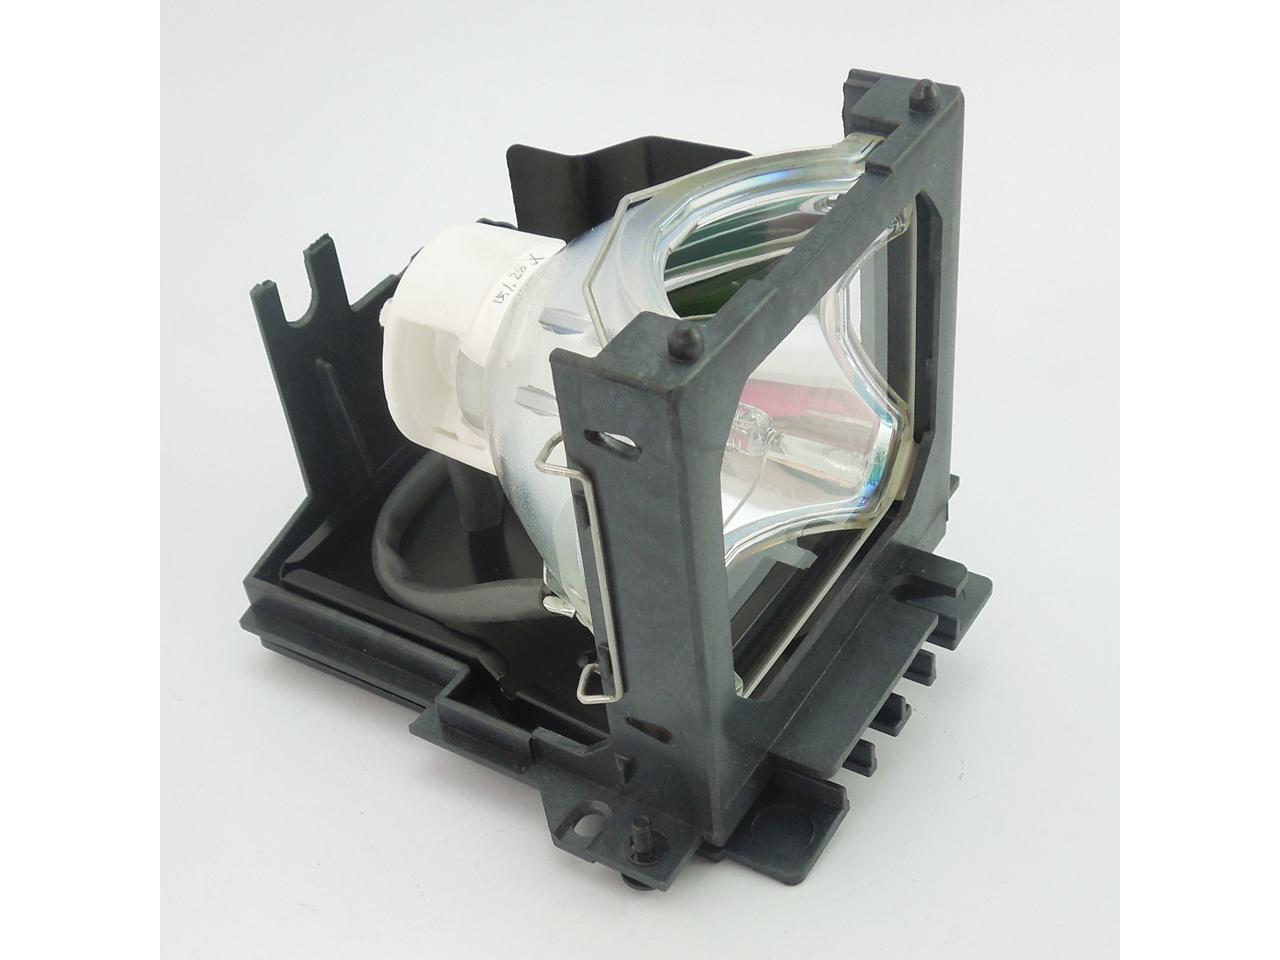 CP-X1200W CP-X1200WA CTLAMP DT00591 Professional Replacement Projector Lamp with Housing for HITACHI CP-X1200